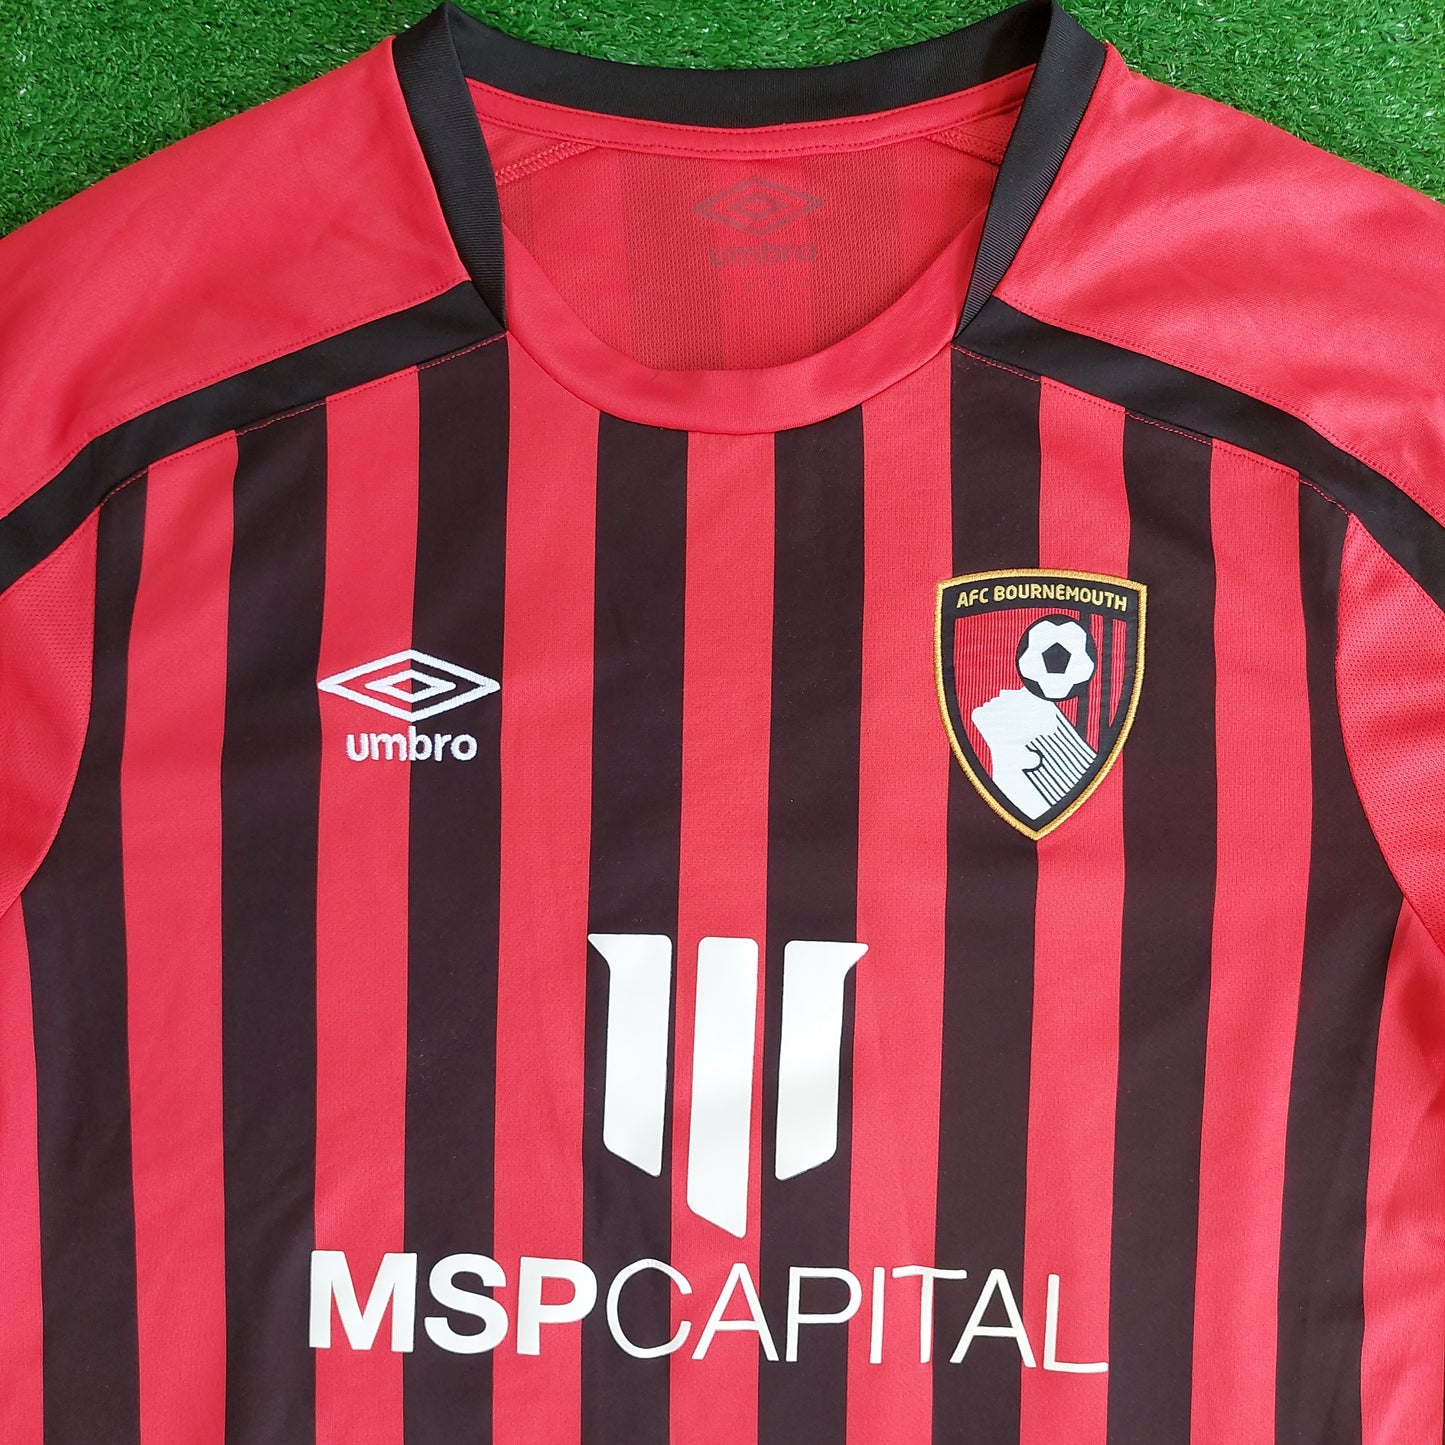 AFC Bournemouth 2021/22 Home Shirt (Excellent) - Size L